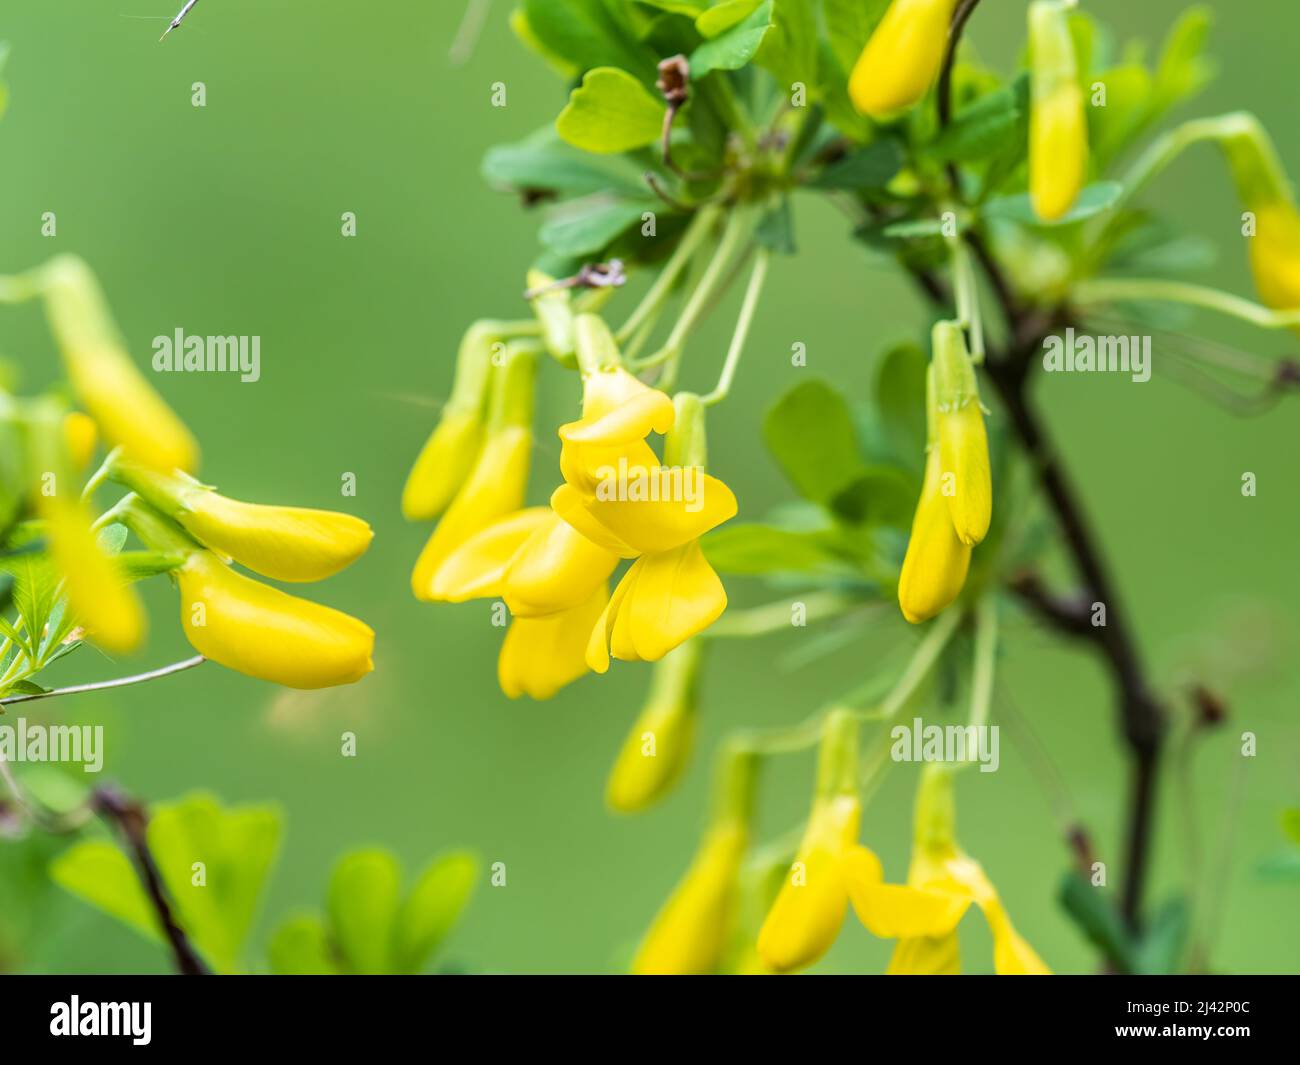 Acacia tree branch with green leaves and yellow flowers. Blooming Caragana Arborescens, the Siberian peashrub, Siberian pea-tree, or caragana Stock Photo